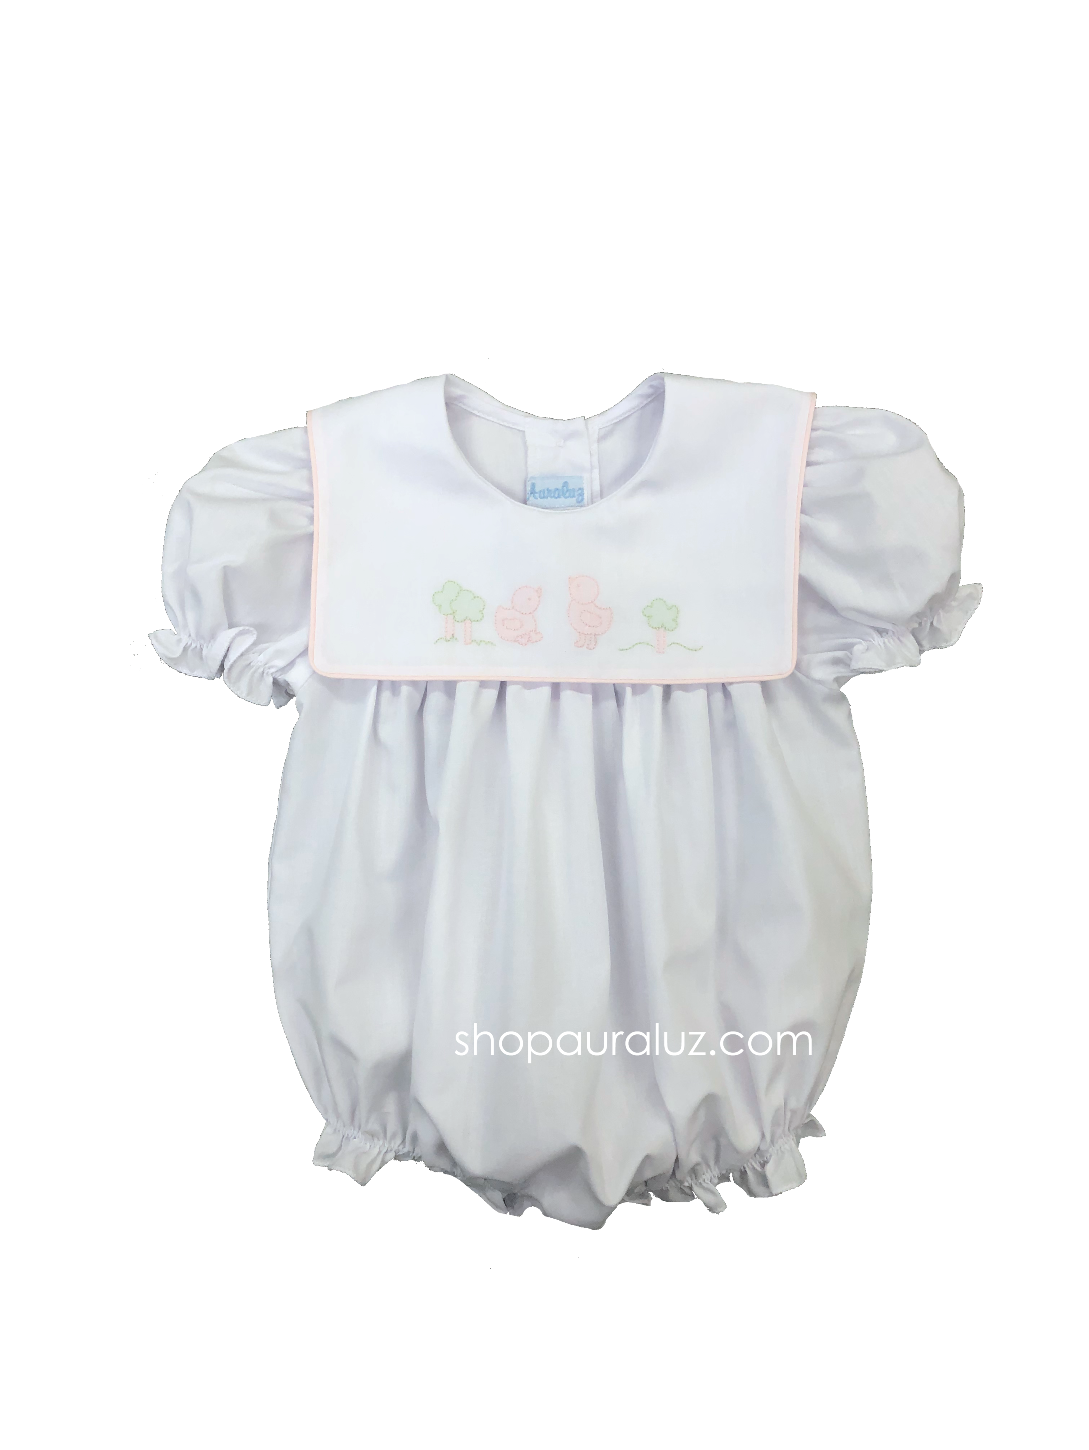 Auraluz Girl Bubble..White with pink binding trim and embroidered chicks